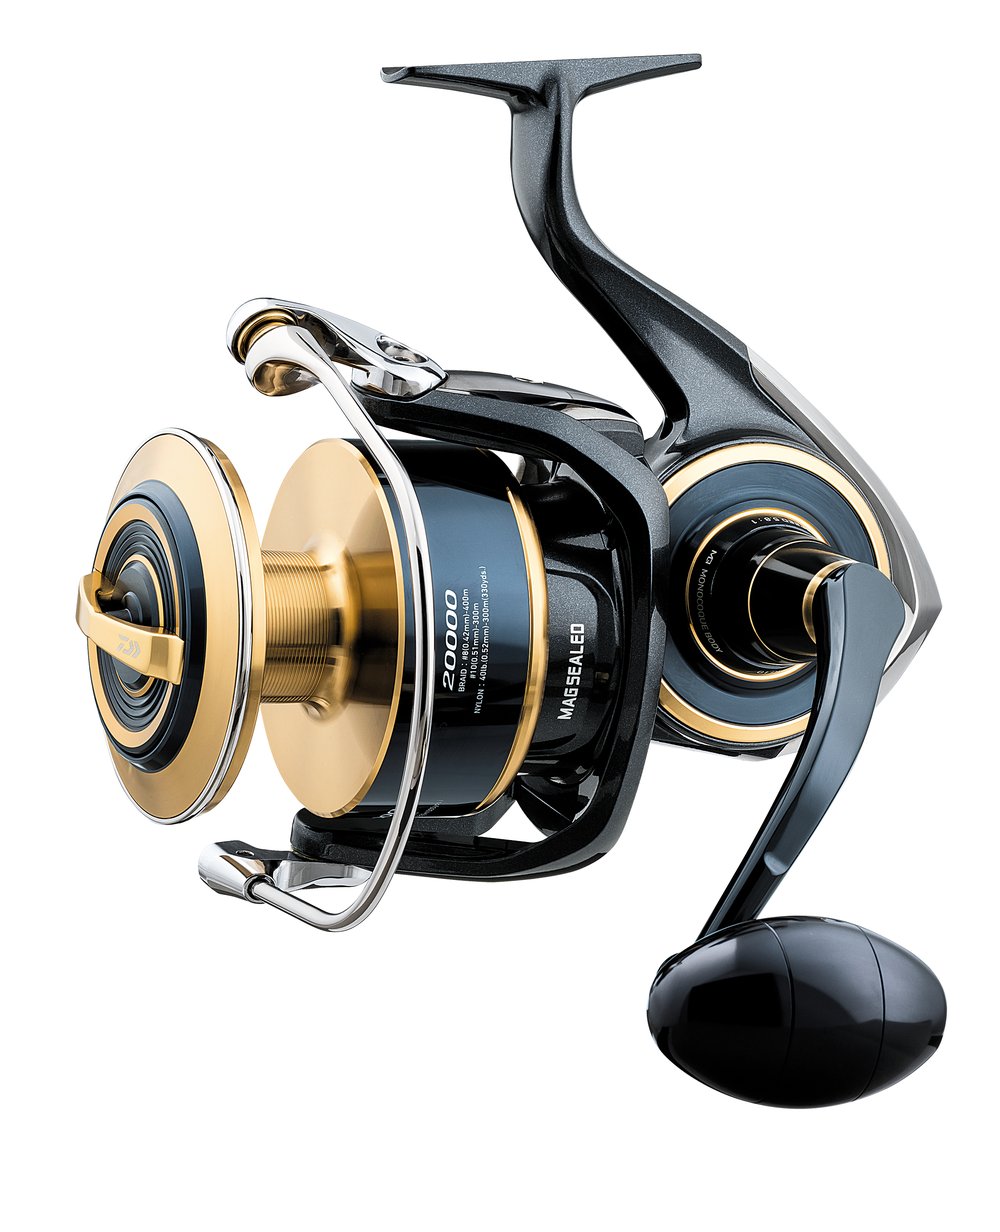 The Daiwa Saltist MQ 4000 is a really fun spinning reel to fish